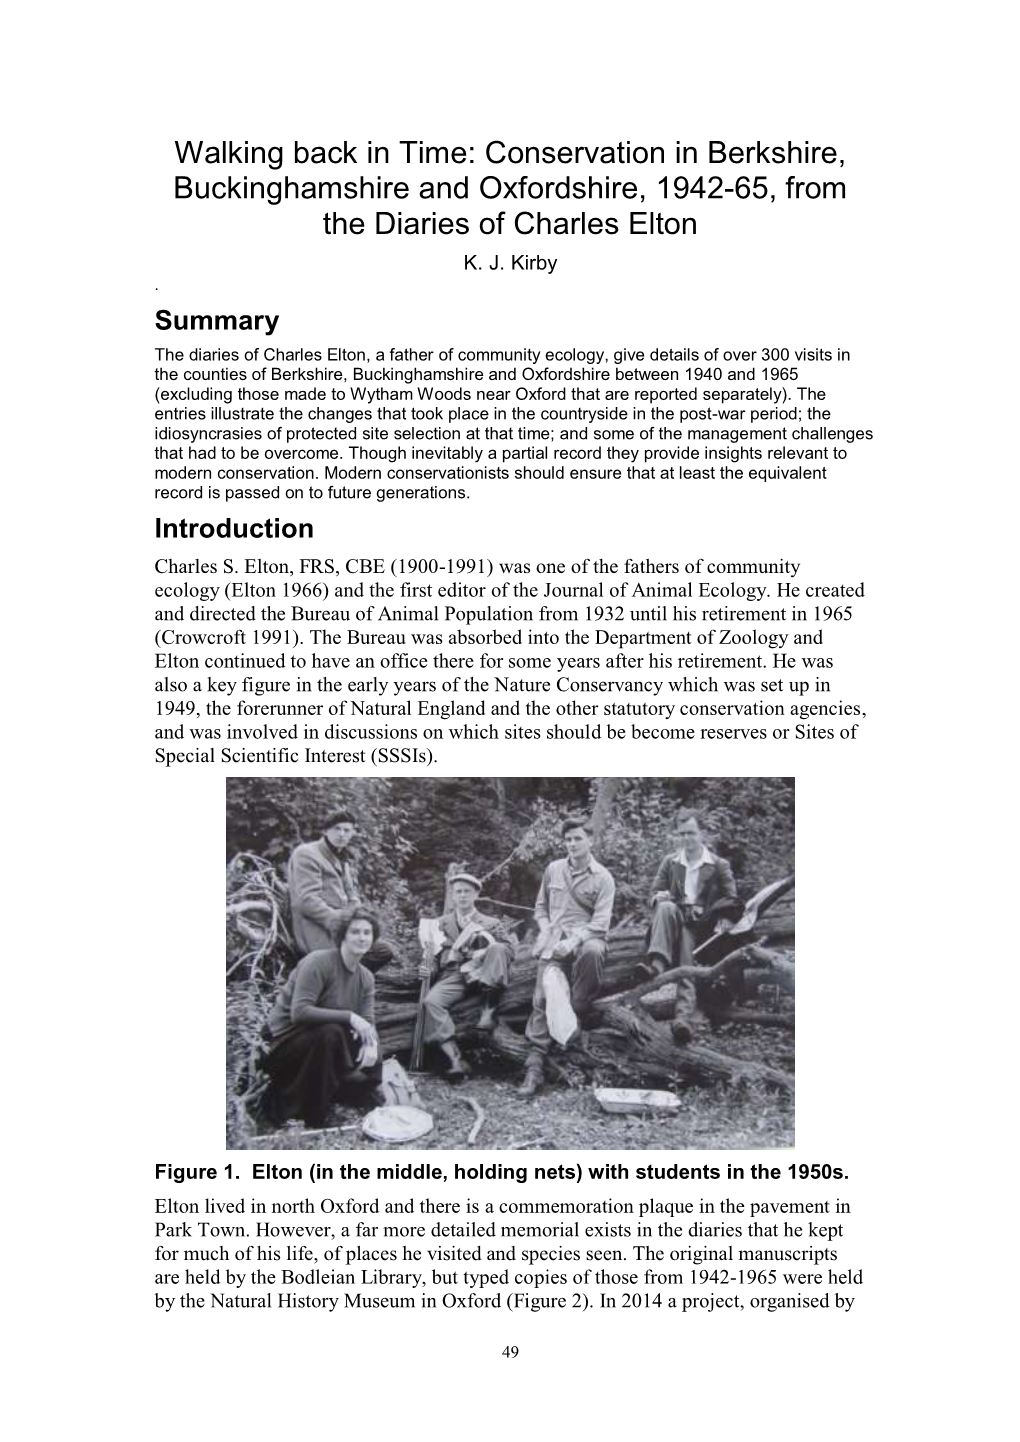 Conservation in Berkshire, Buckinghamshire and Oxfordshire, 1942-65, from the Diaries of Charles Elton K